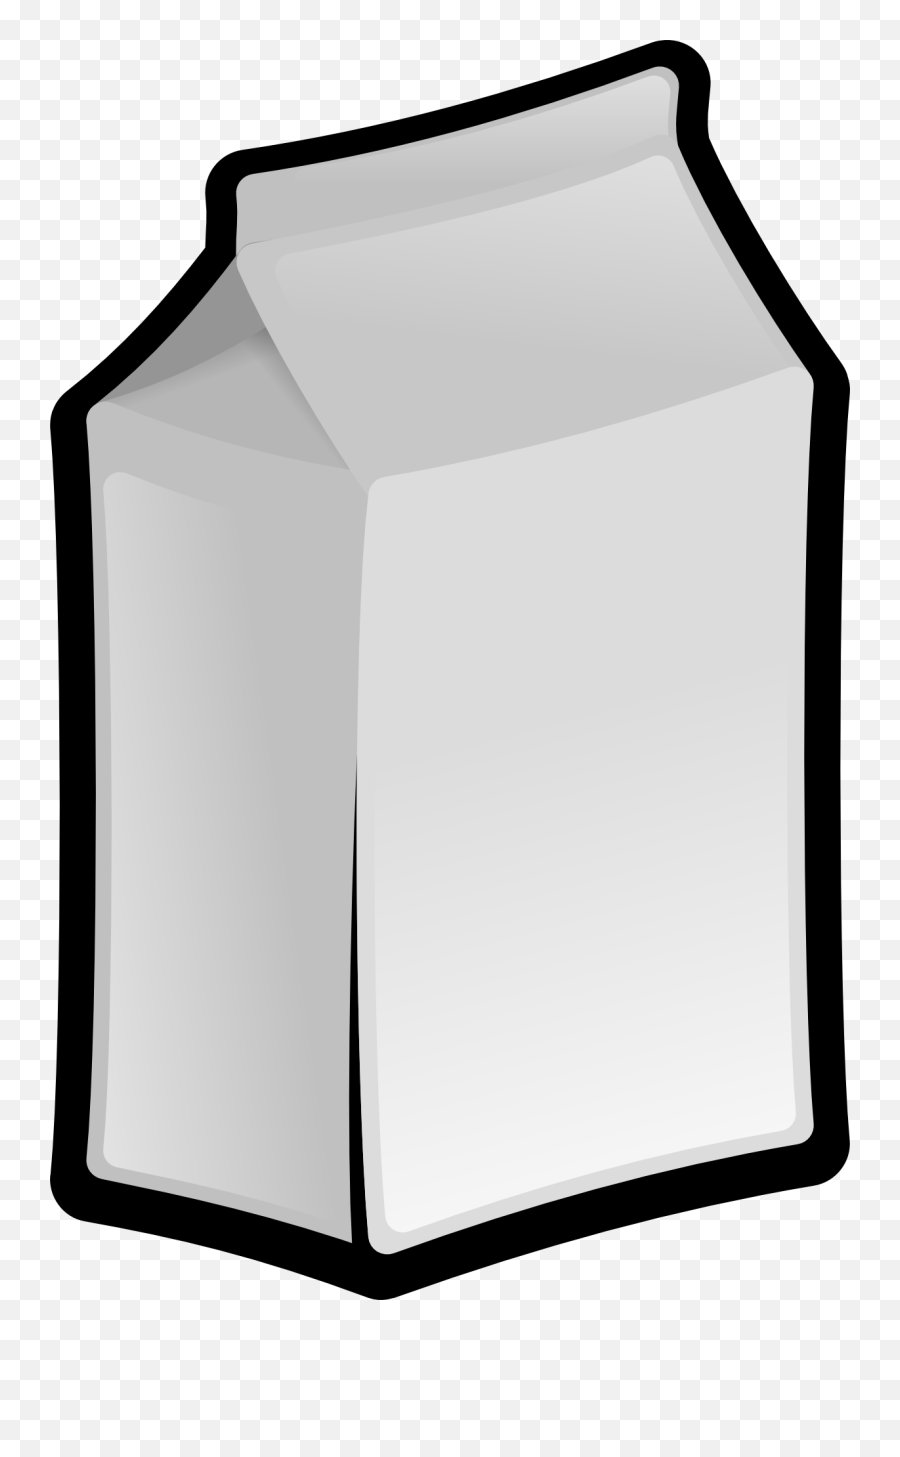 Milk Carton White - Free Vector Graphic On Pixabay Milk With Clear Background Emoji,White Box Png